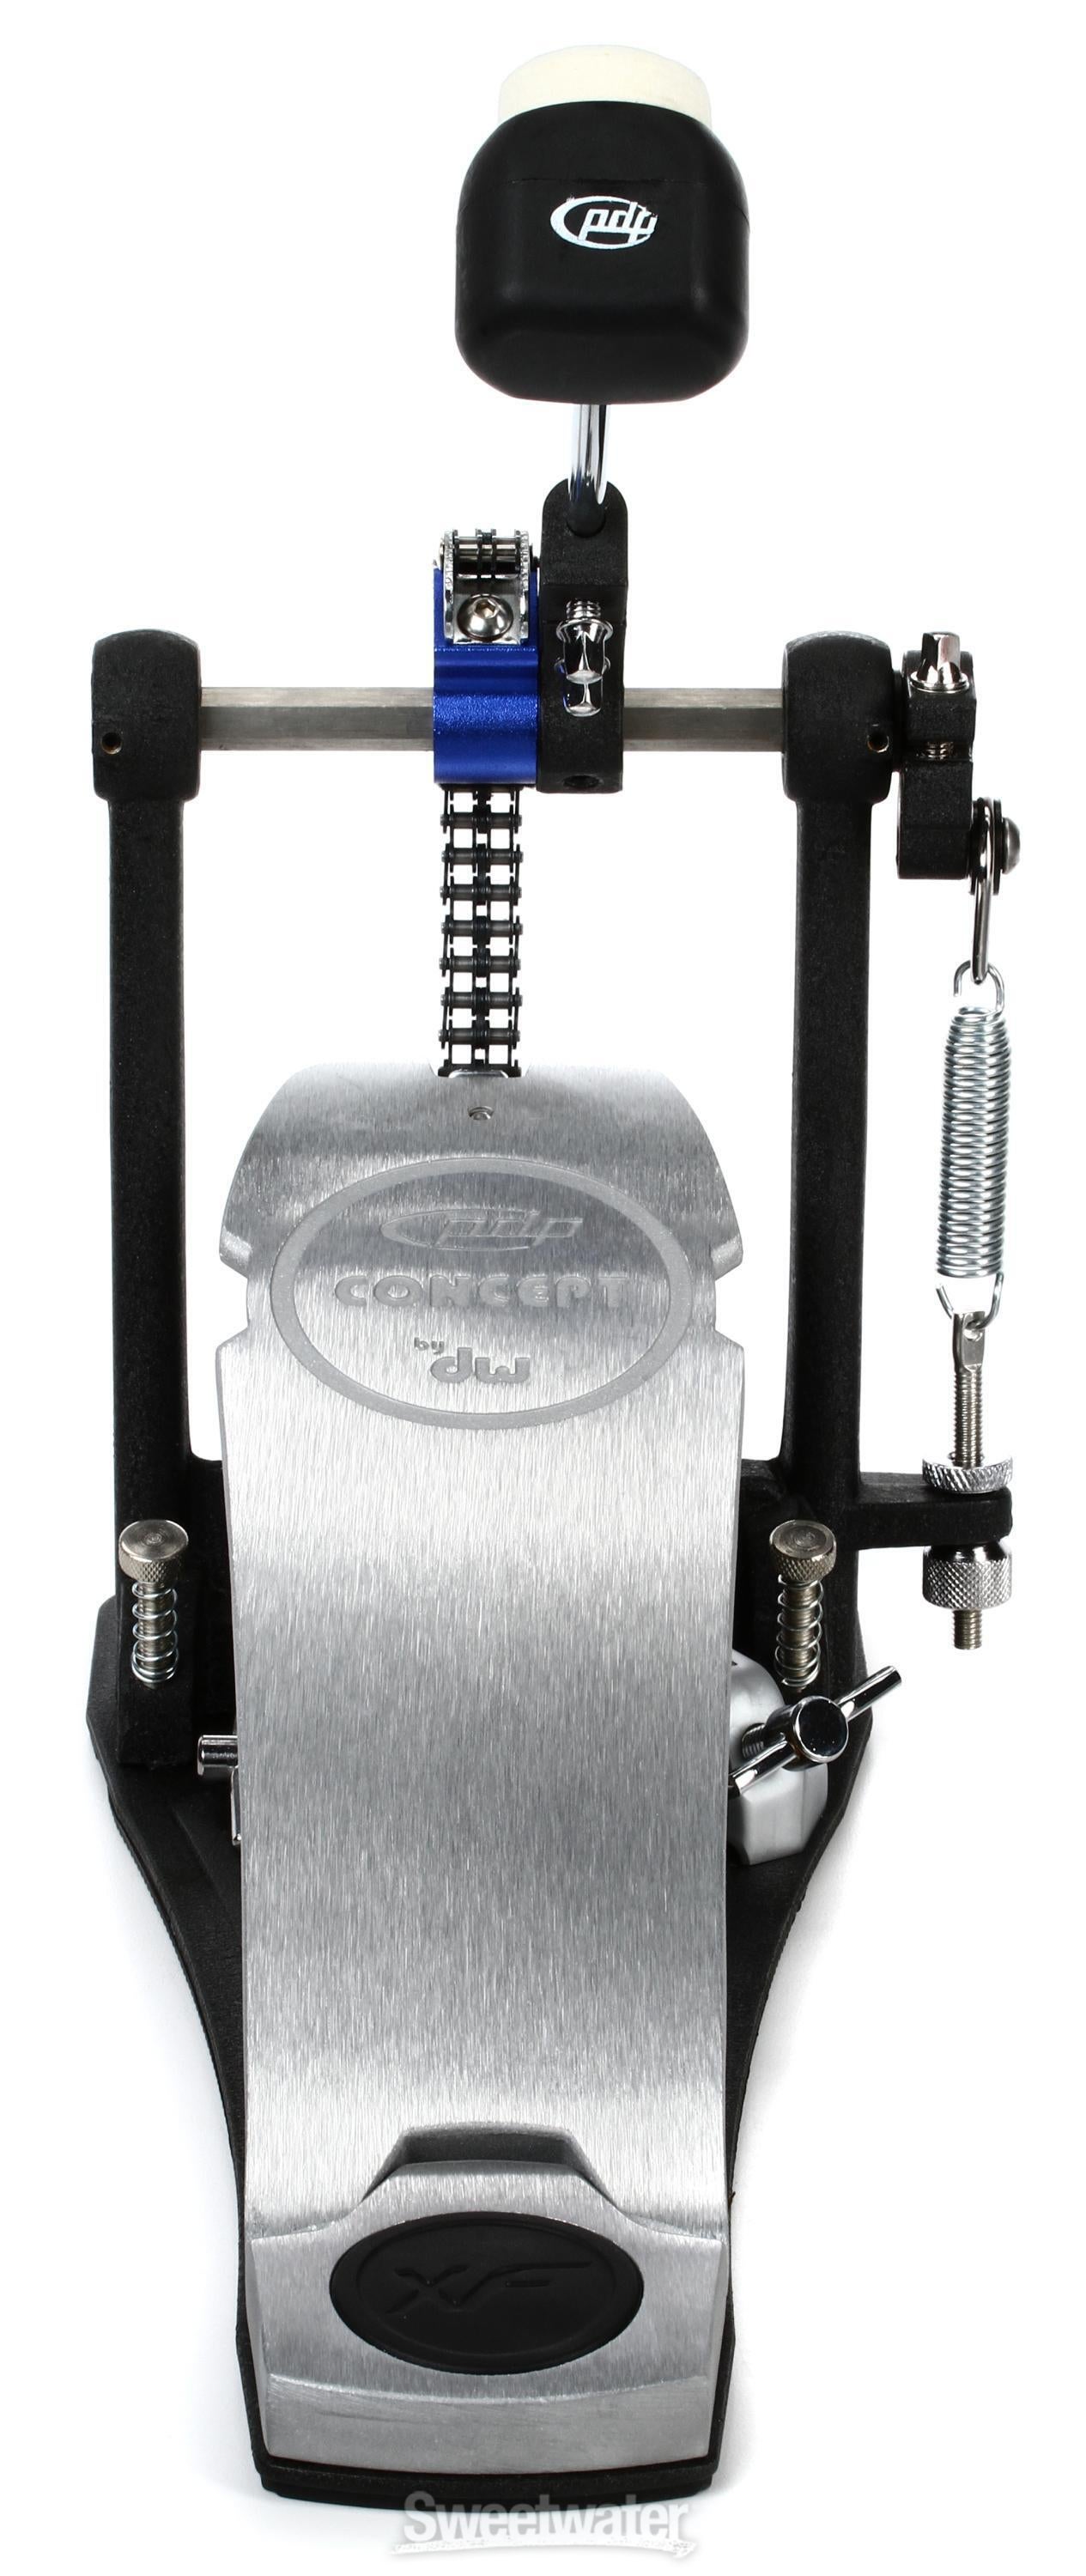 PDP PDSPCXF Concept Single Bass Drum Pedal Reviews | Sweetwater